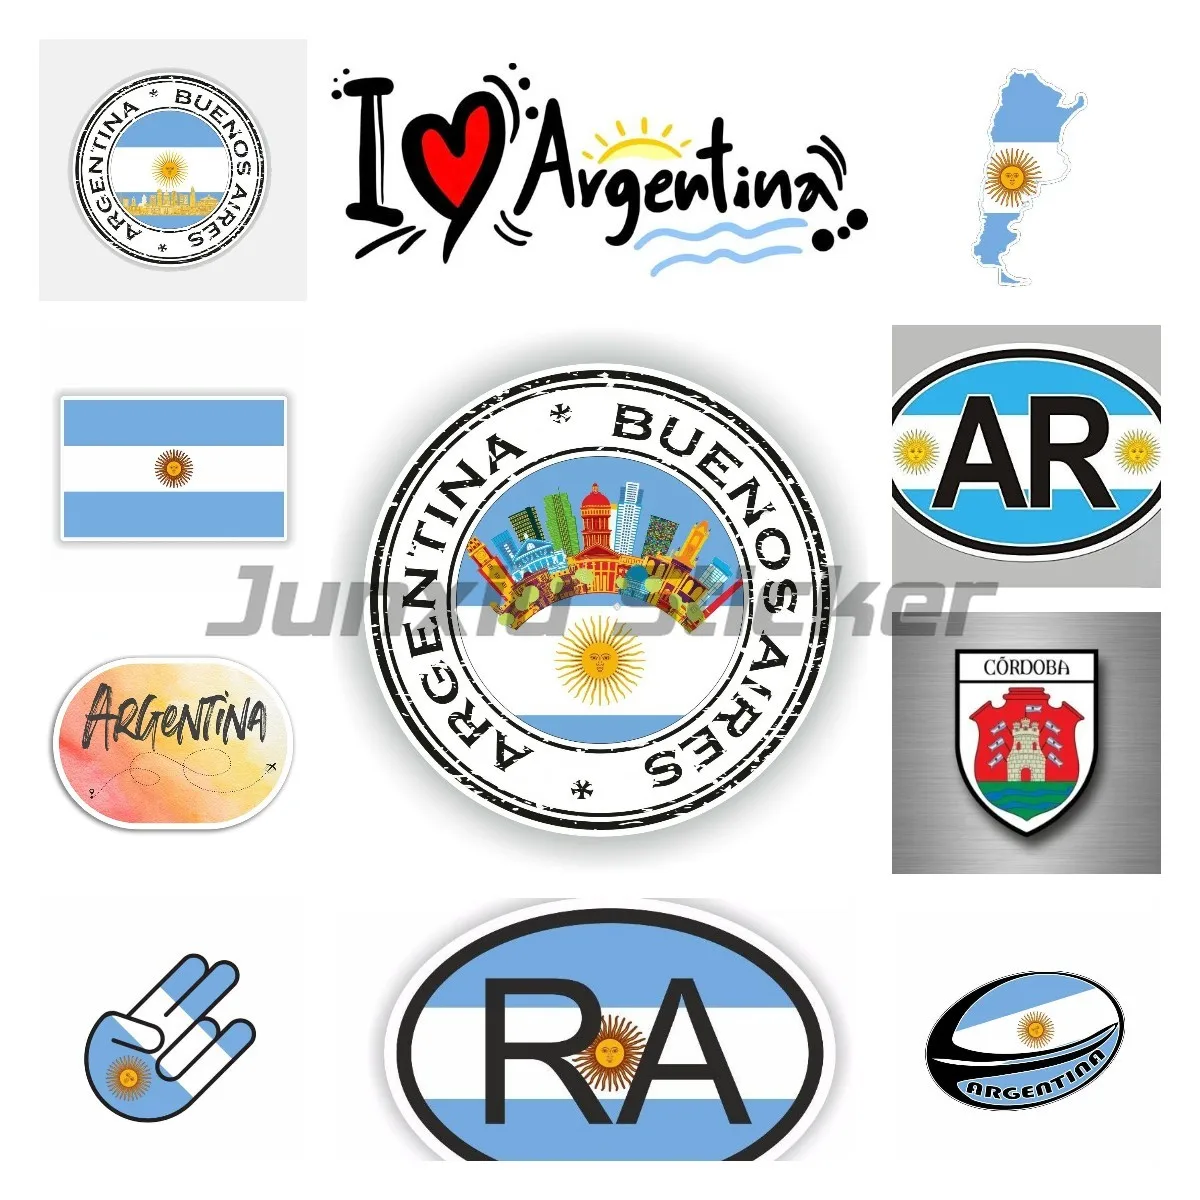 Argentina Buenos Aires National Flag Helmet  Motorcycle Accessories Decal Funny Car Sticker Vinyl Waterproof Decal